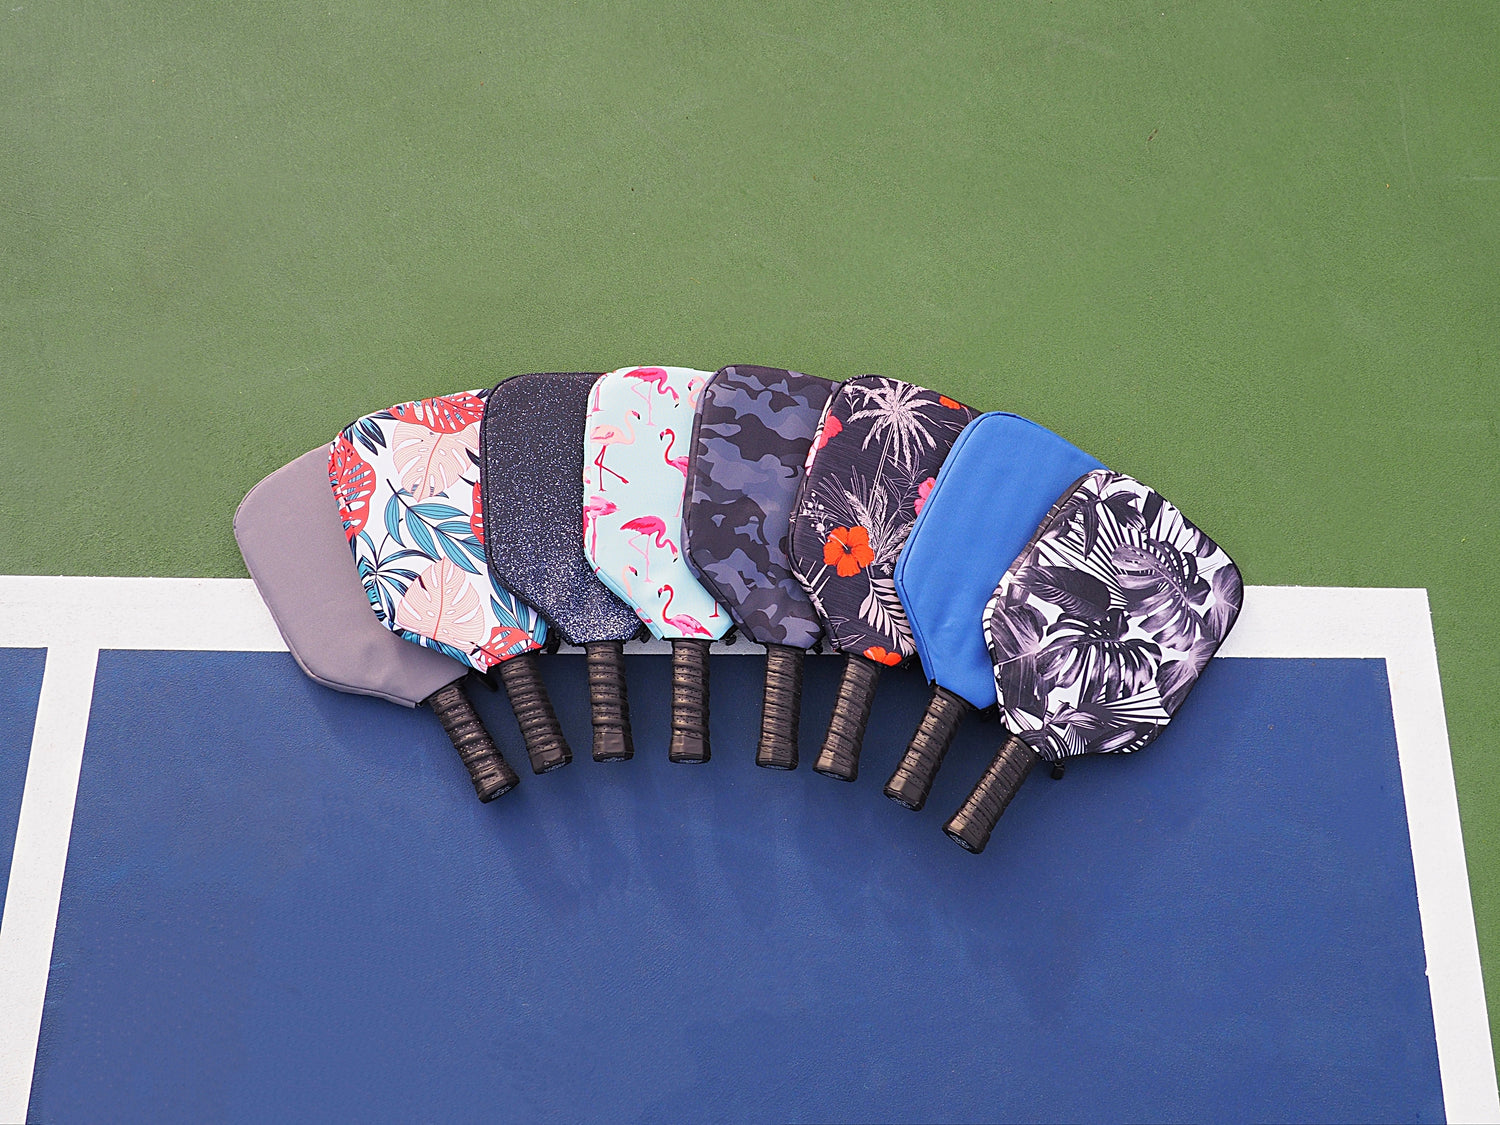 Padded pickleball paddle covers in fun prints to protect racket against scratches, dings and dents. 